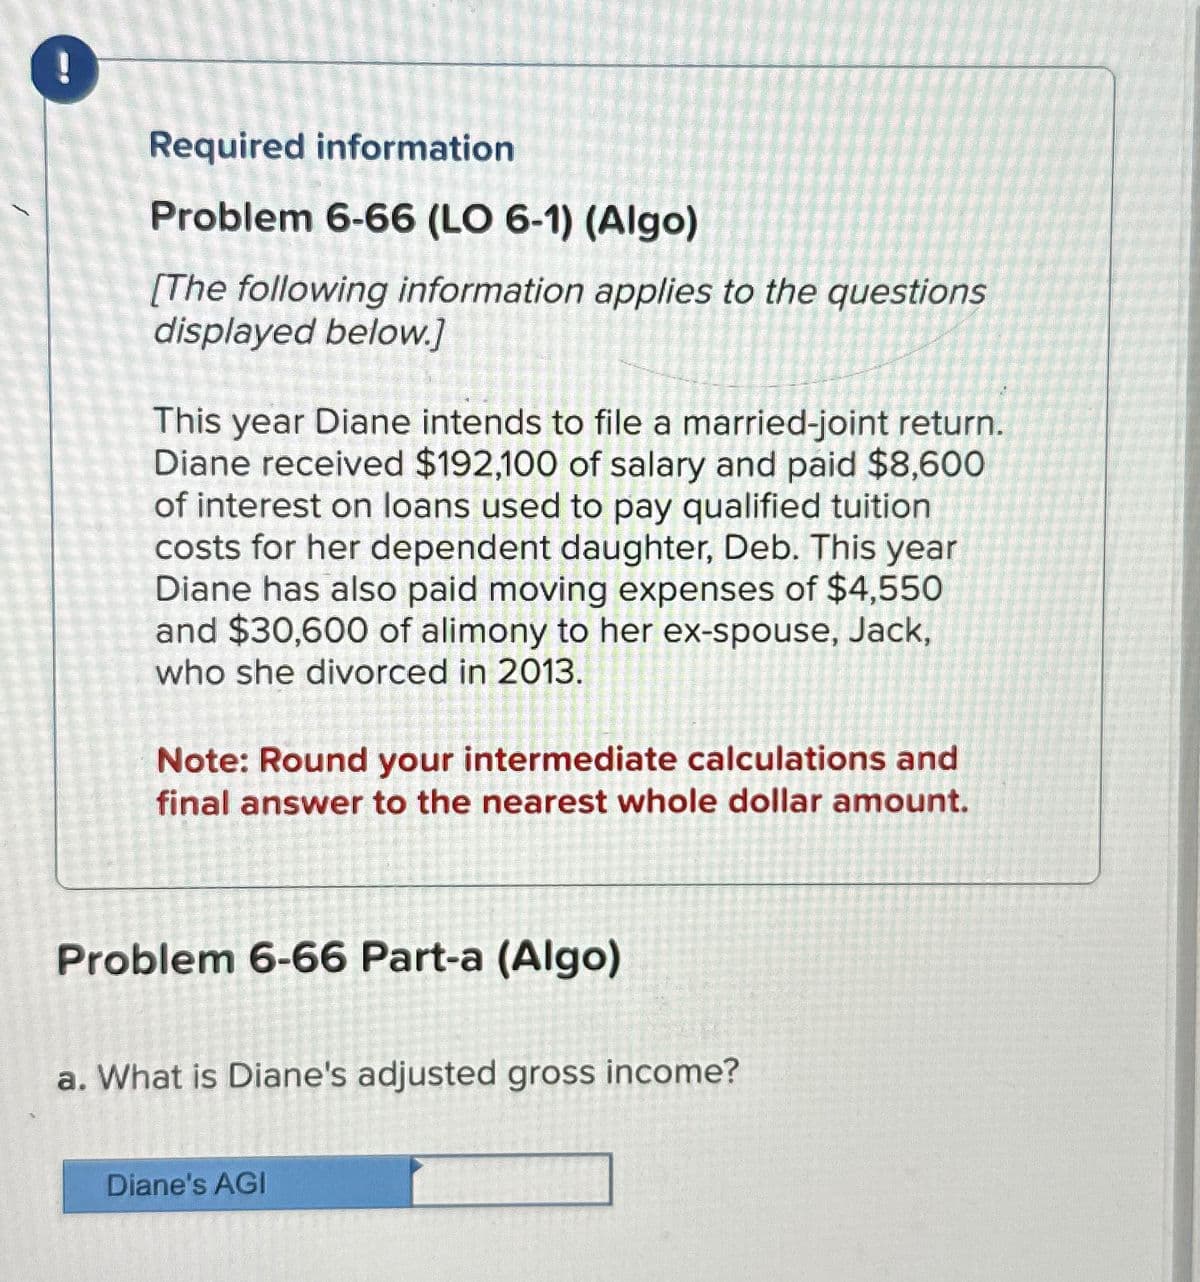 Required information
Problem 6-66 (LO 6-1) (Algo)
[The following information applies to the questions
displayed below.]
This year Diane intends to file a married-joint return.
Diane received $192,100 of salary and paid $8,600
of interest on loans used to pay qualified tuition
costs for her dependent daughter, Deb. This year
Diane has also paid moving expenses of $4,550
and $30,600 of alimony to her ex-spouse, Jack,
who she divorced in 2013.
Note: Round your intermediate calculations and
final answer to the nearest whole dollar amount.
Problem 6-66 Part-a (Algo)
a. What is Diane's adjusted gross income?
Diane's AGI